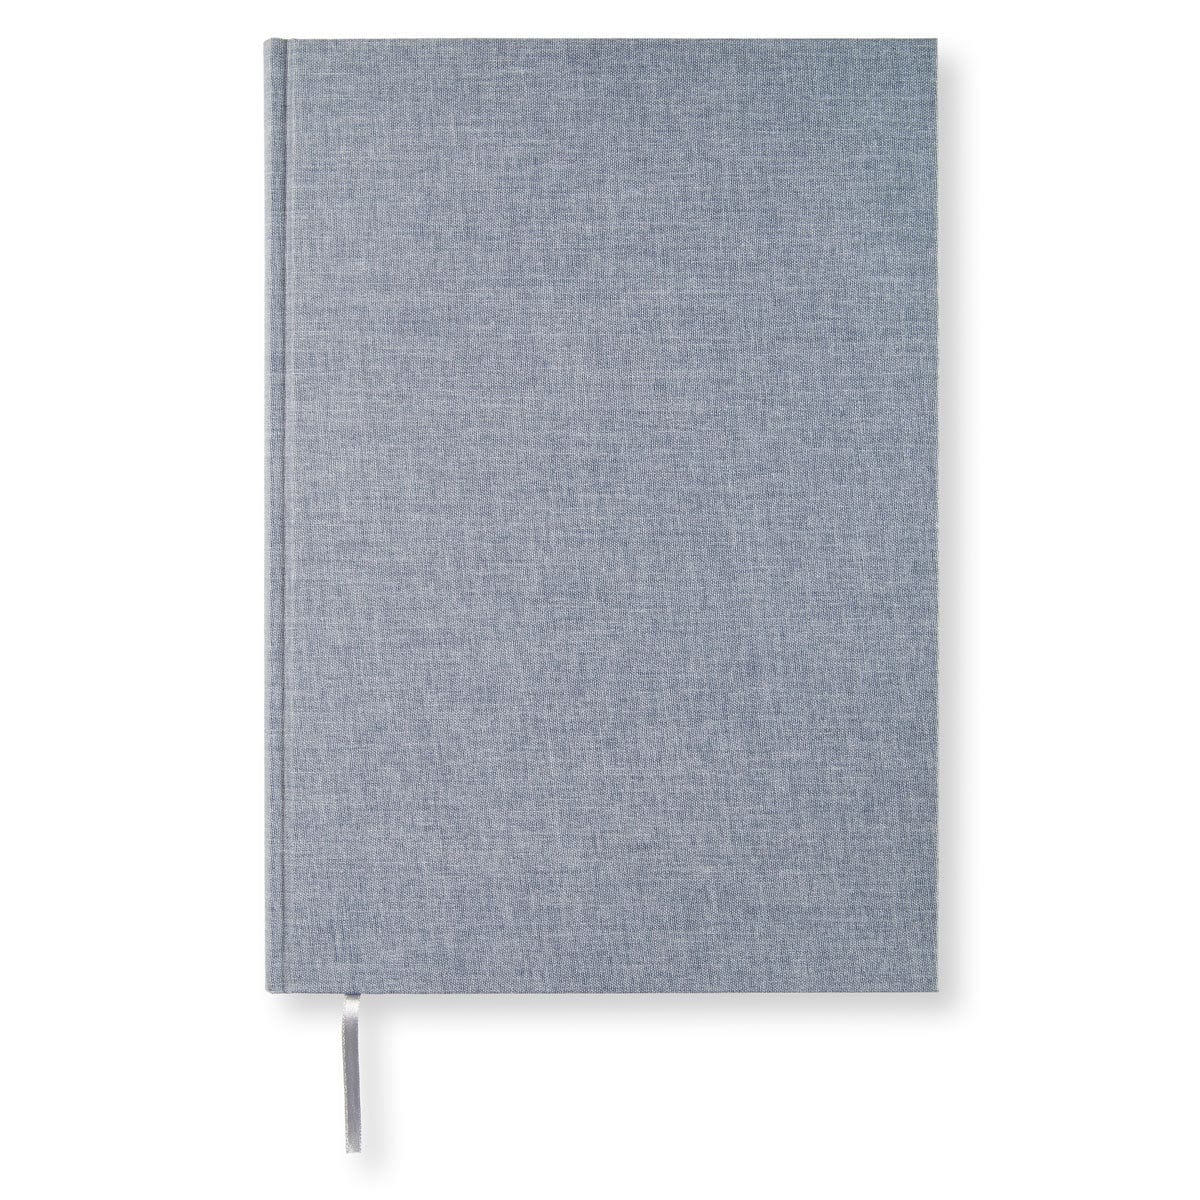 PaperStyle PS NOTEBOOK A4 Ruled Denim